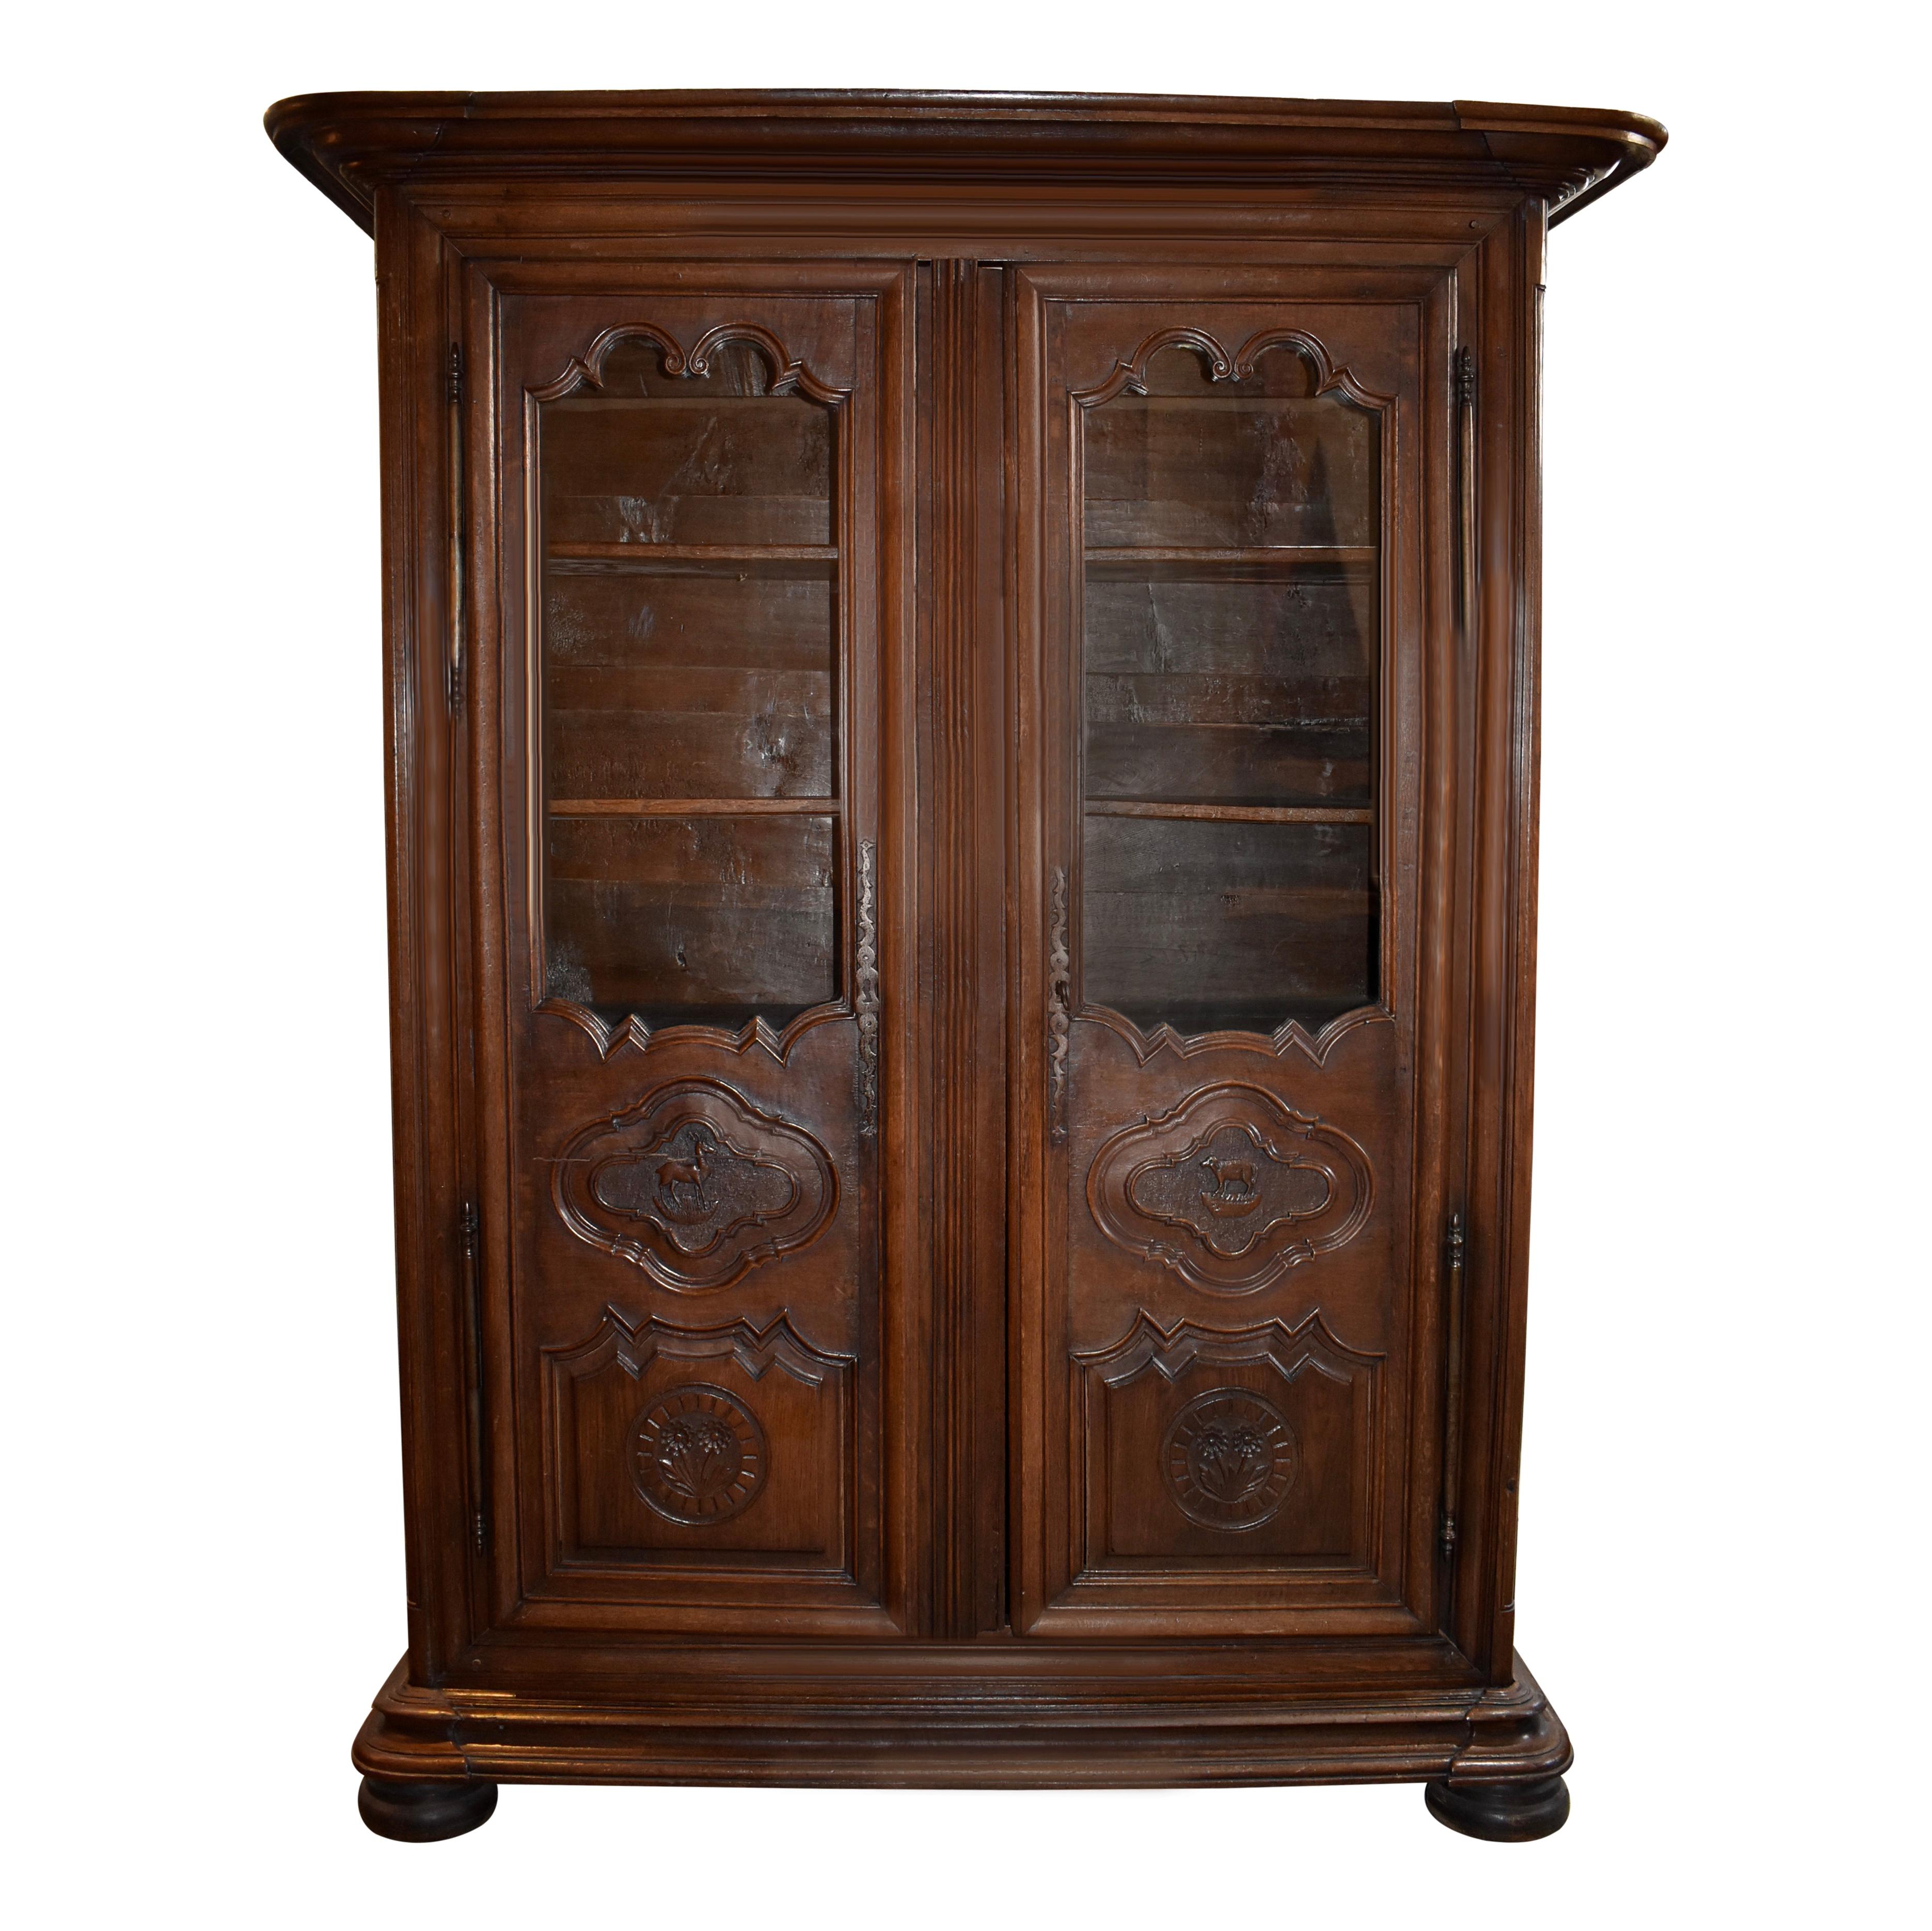 This beautiful oak bookcase showcases two glass front doors with carved lower door panels, one with a carved roe deer to symbolize Belgium's native animals the other with a carved lamb to symbolize its domesticated animals. The doors open to three